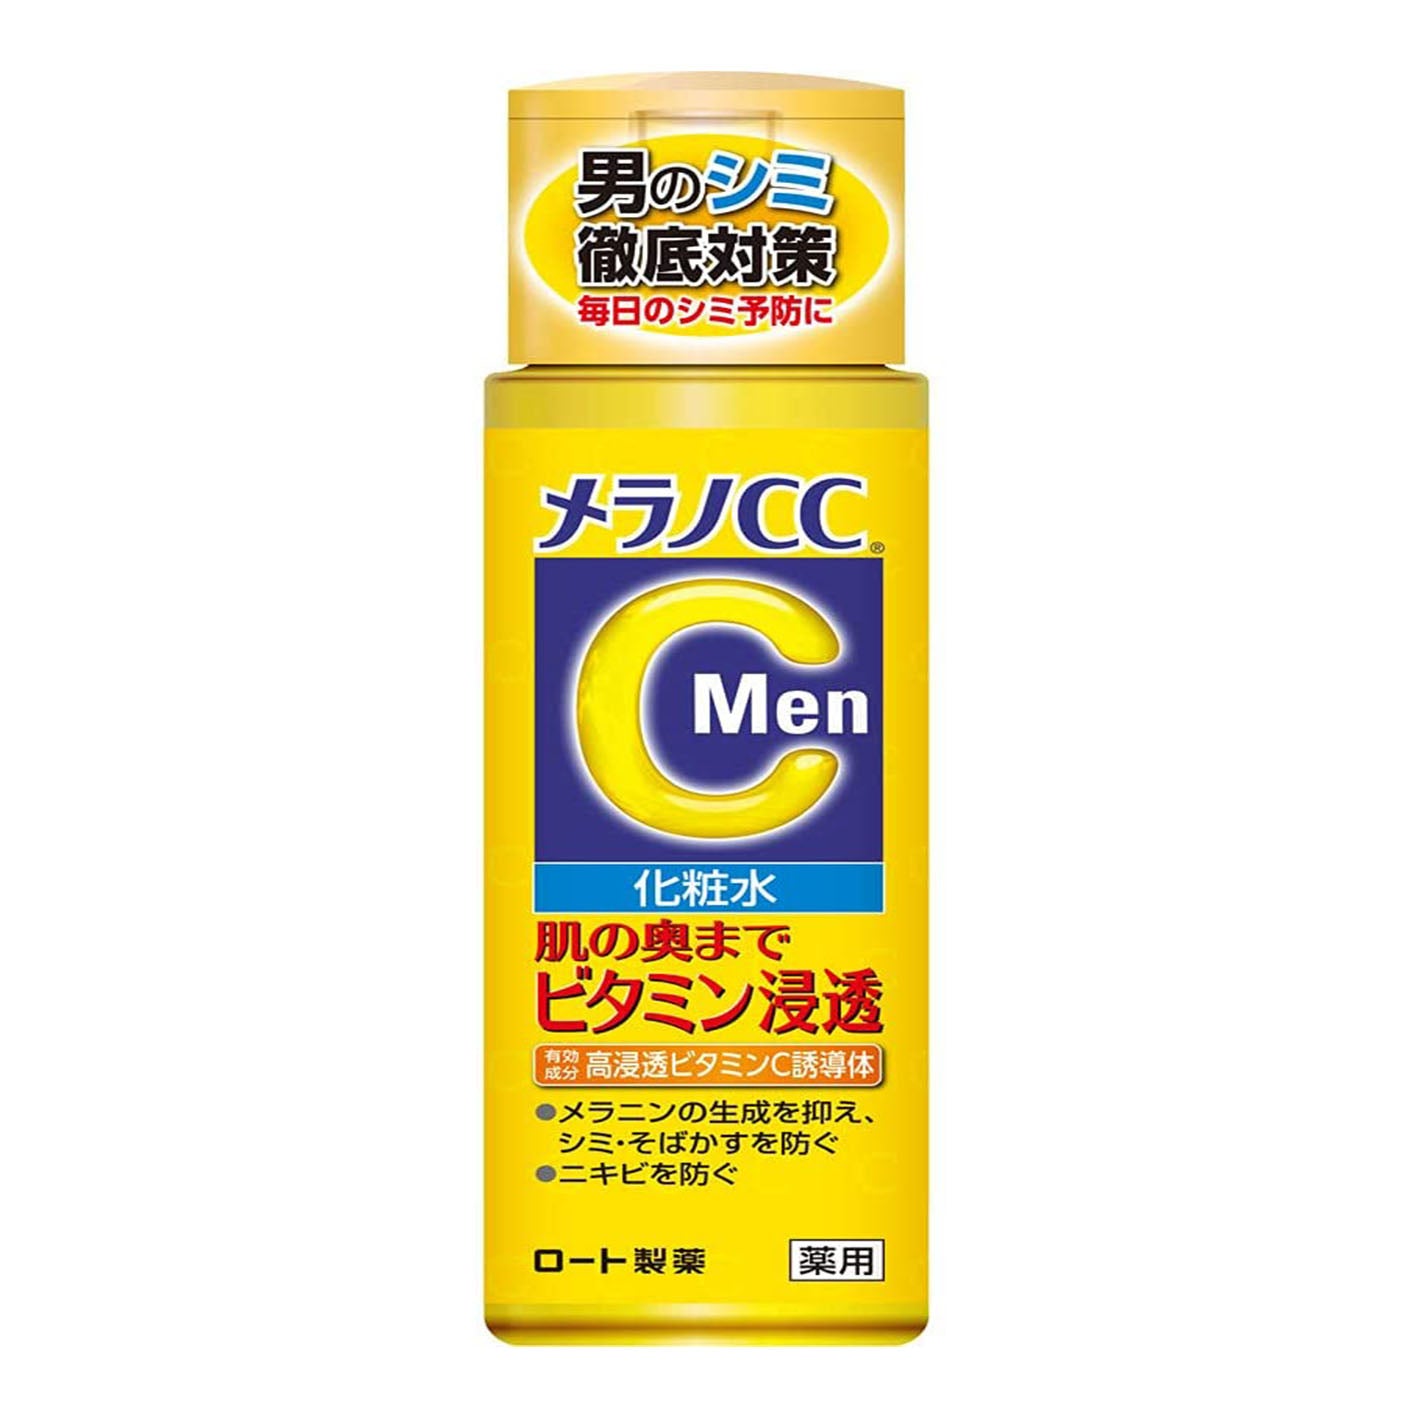 Rohto Melano CC Men Medicinal Stain Measures Lotion 170ml - Harajuku Culture Japan - Japanease Products Store Beauty and Stationery